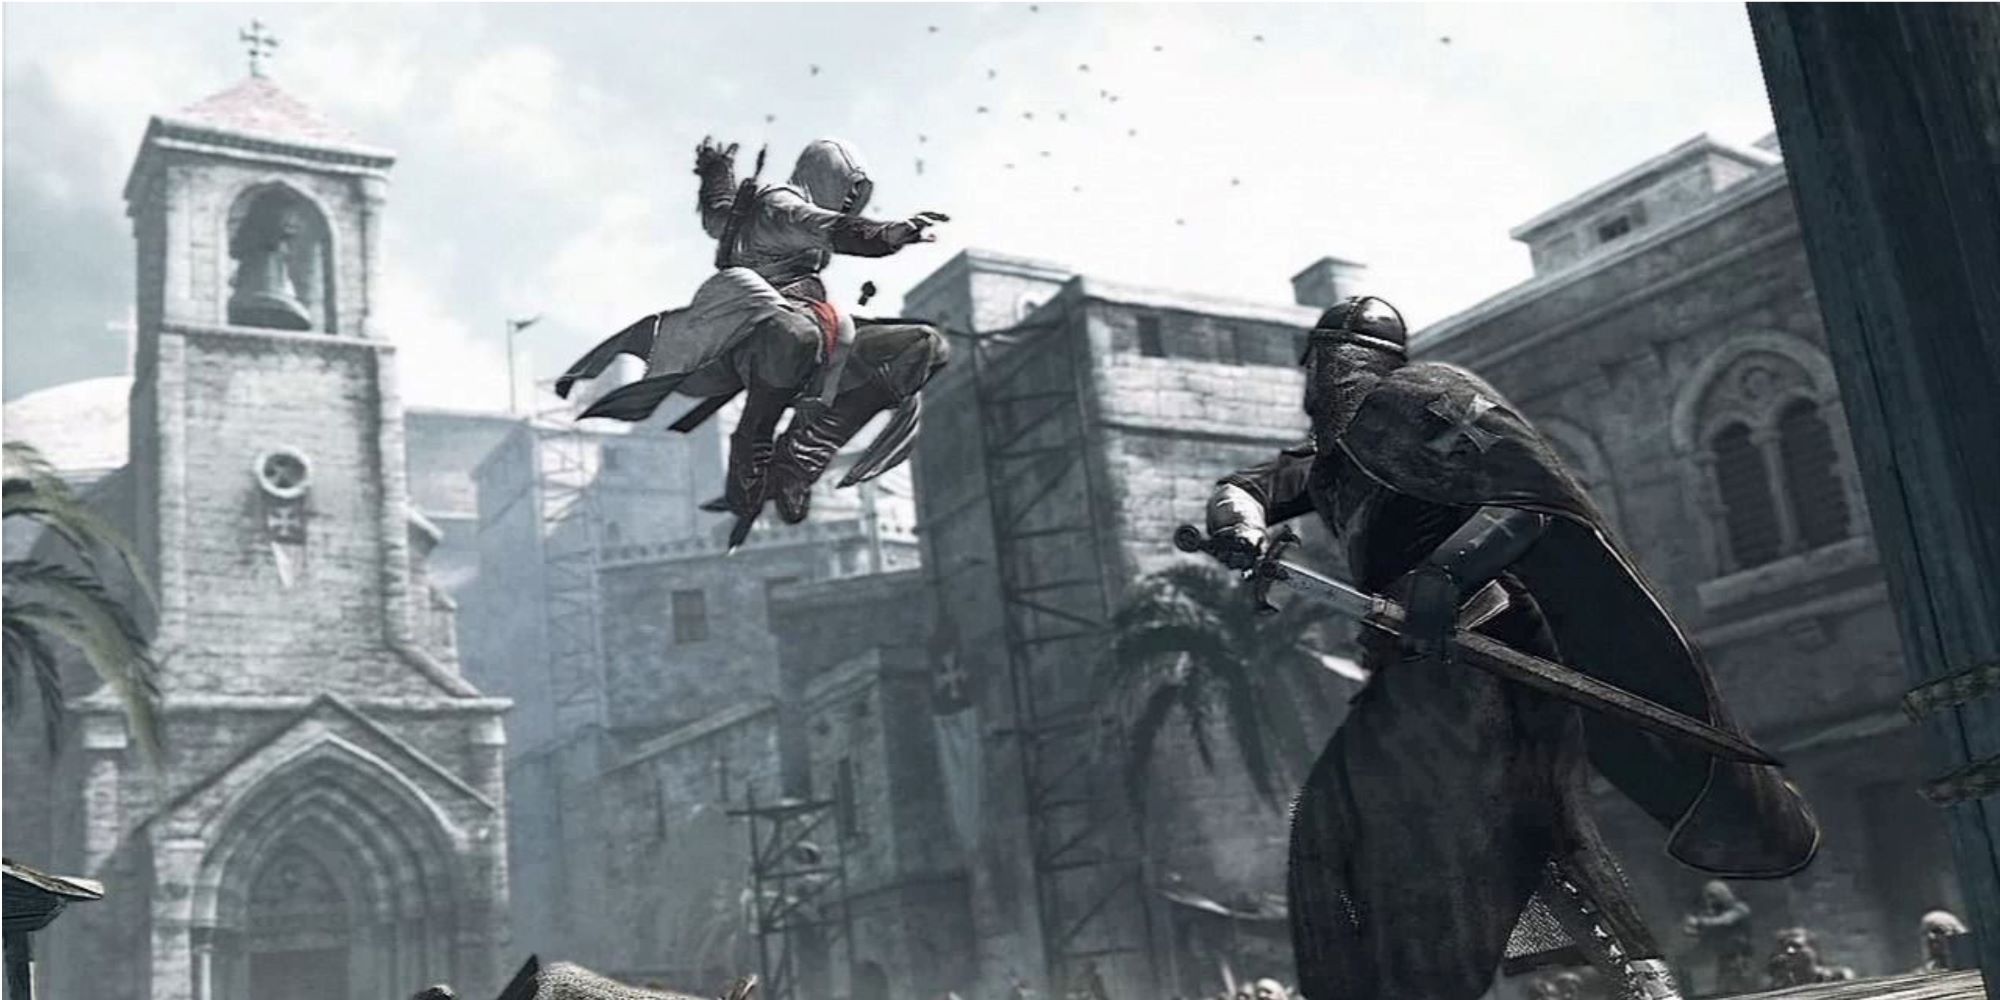 Altair performs a jumping strike on a templar in Assassin's Creed